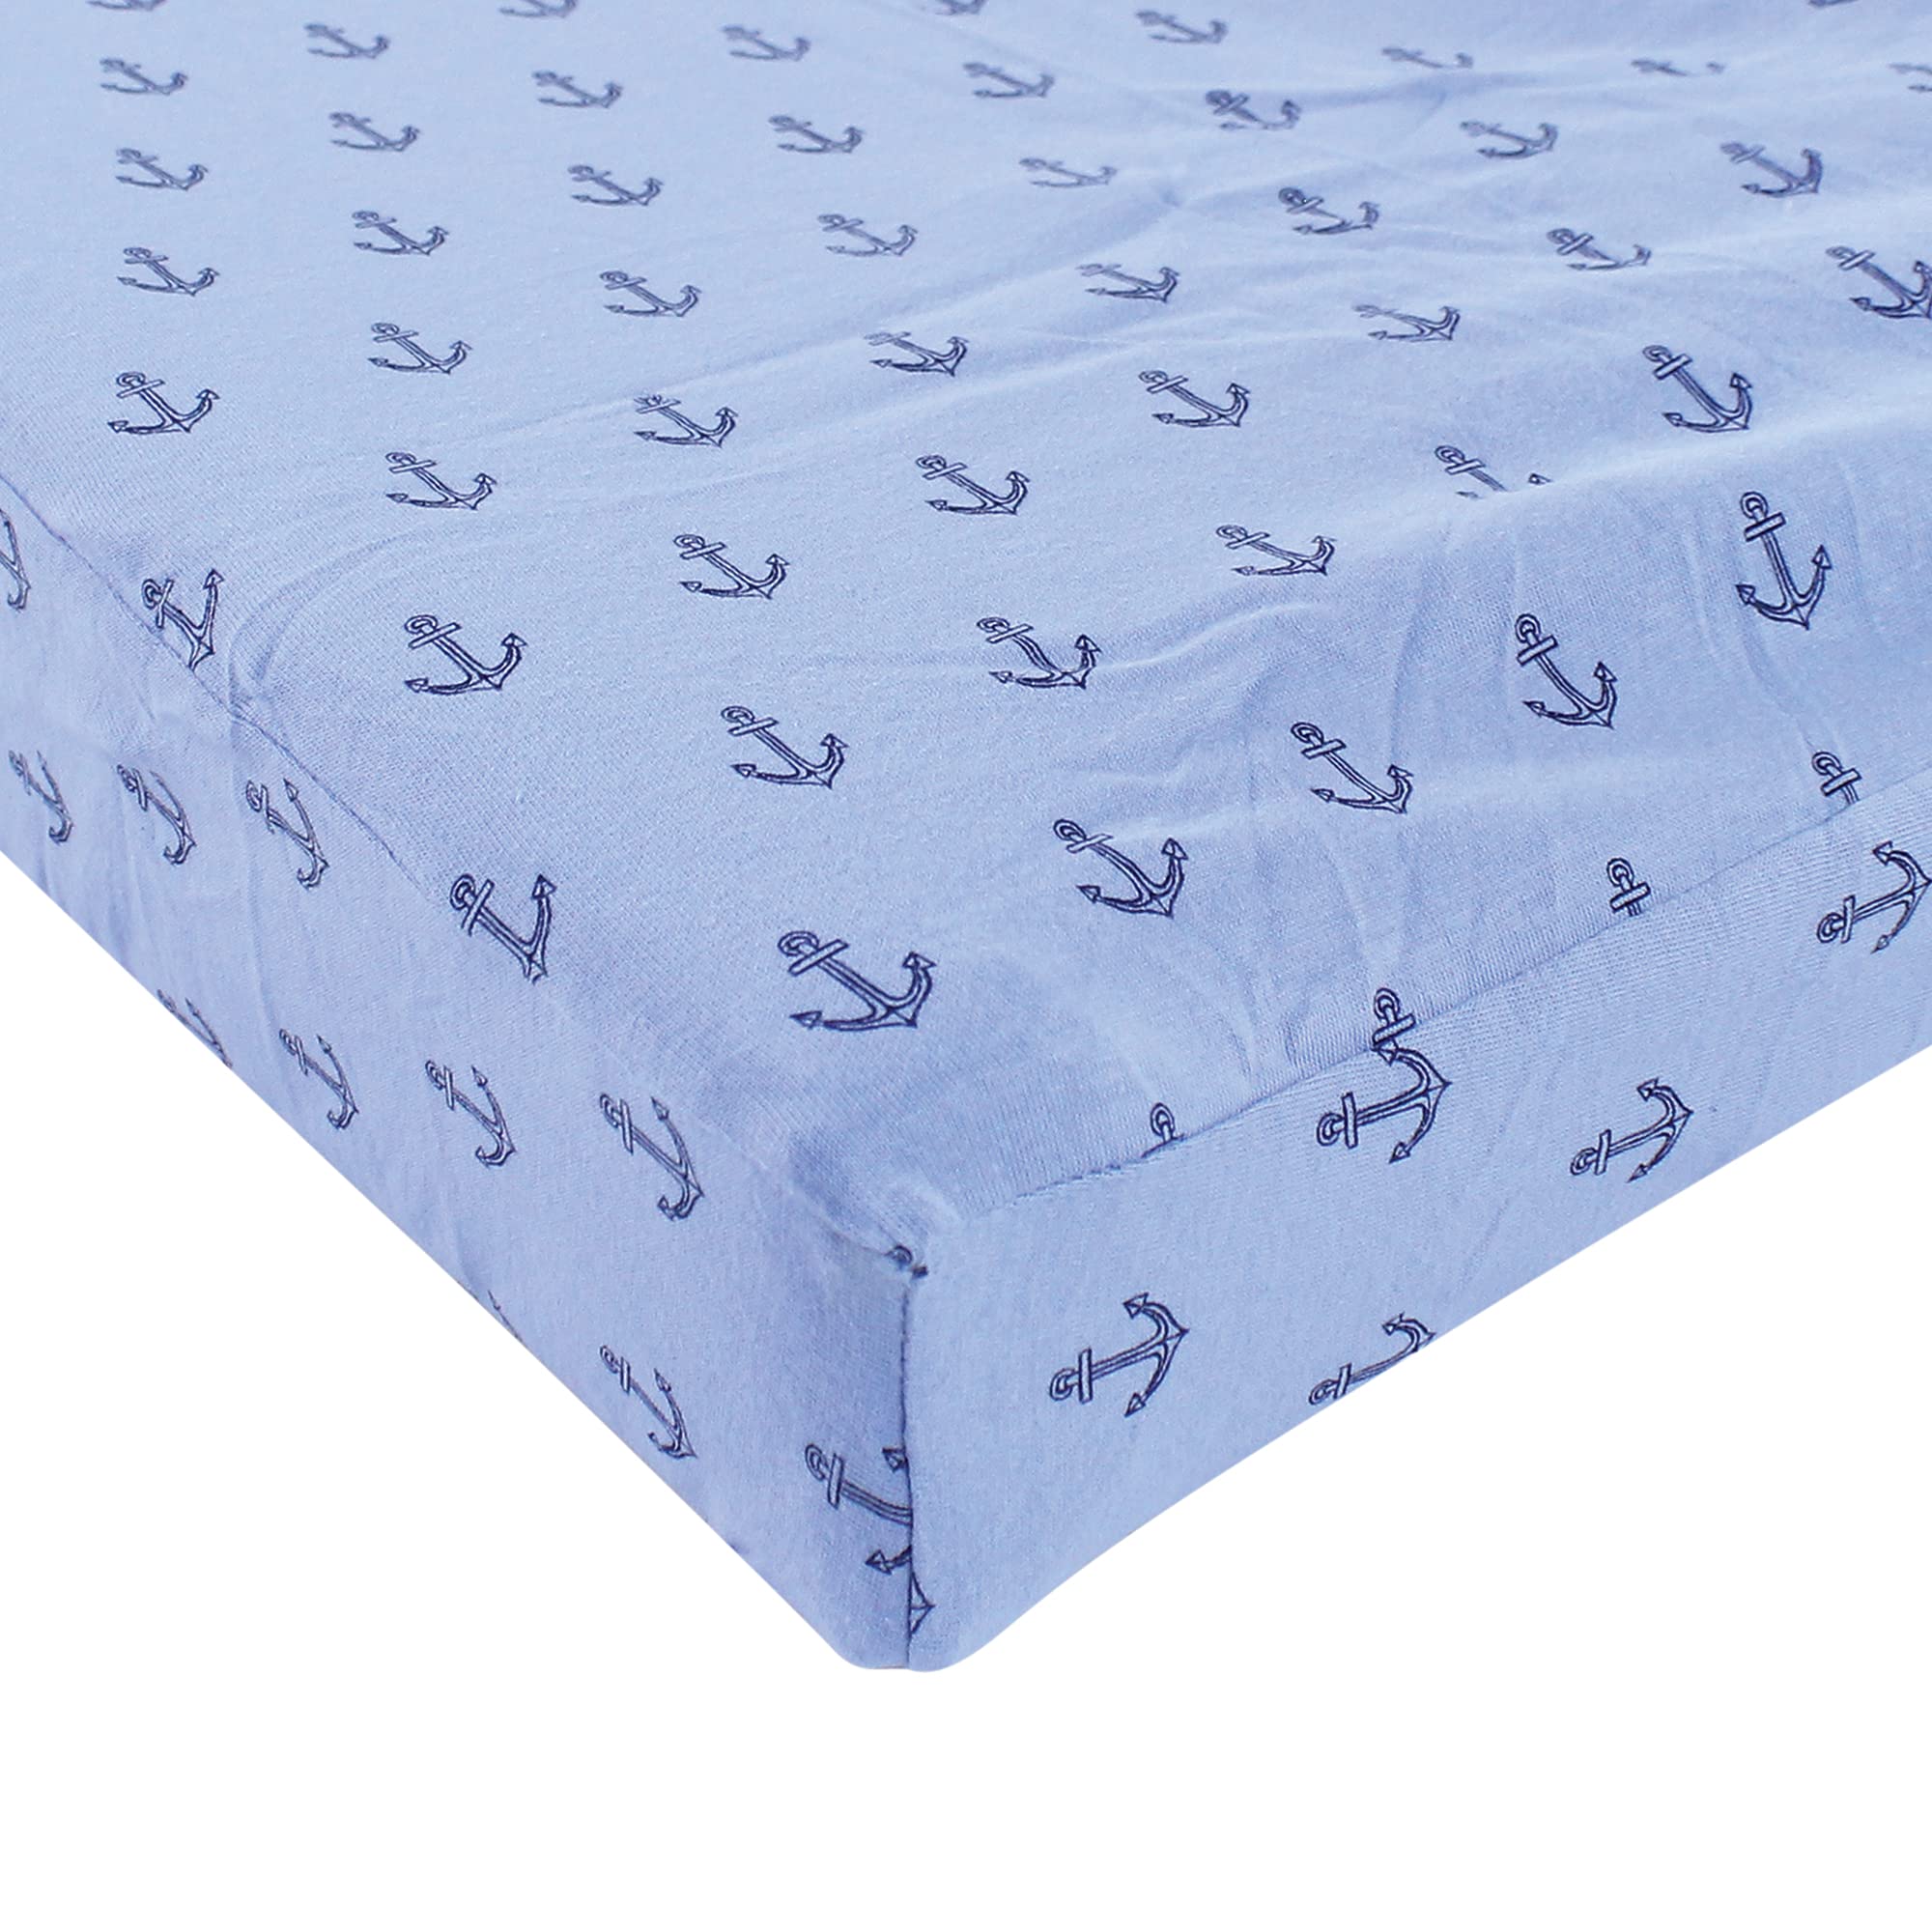 Hudson Baby Unisex Baby Cotton Changing Pad Cover, Blue Whale, One Size